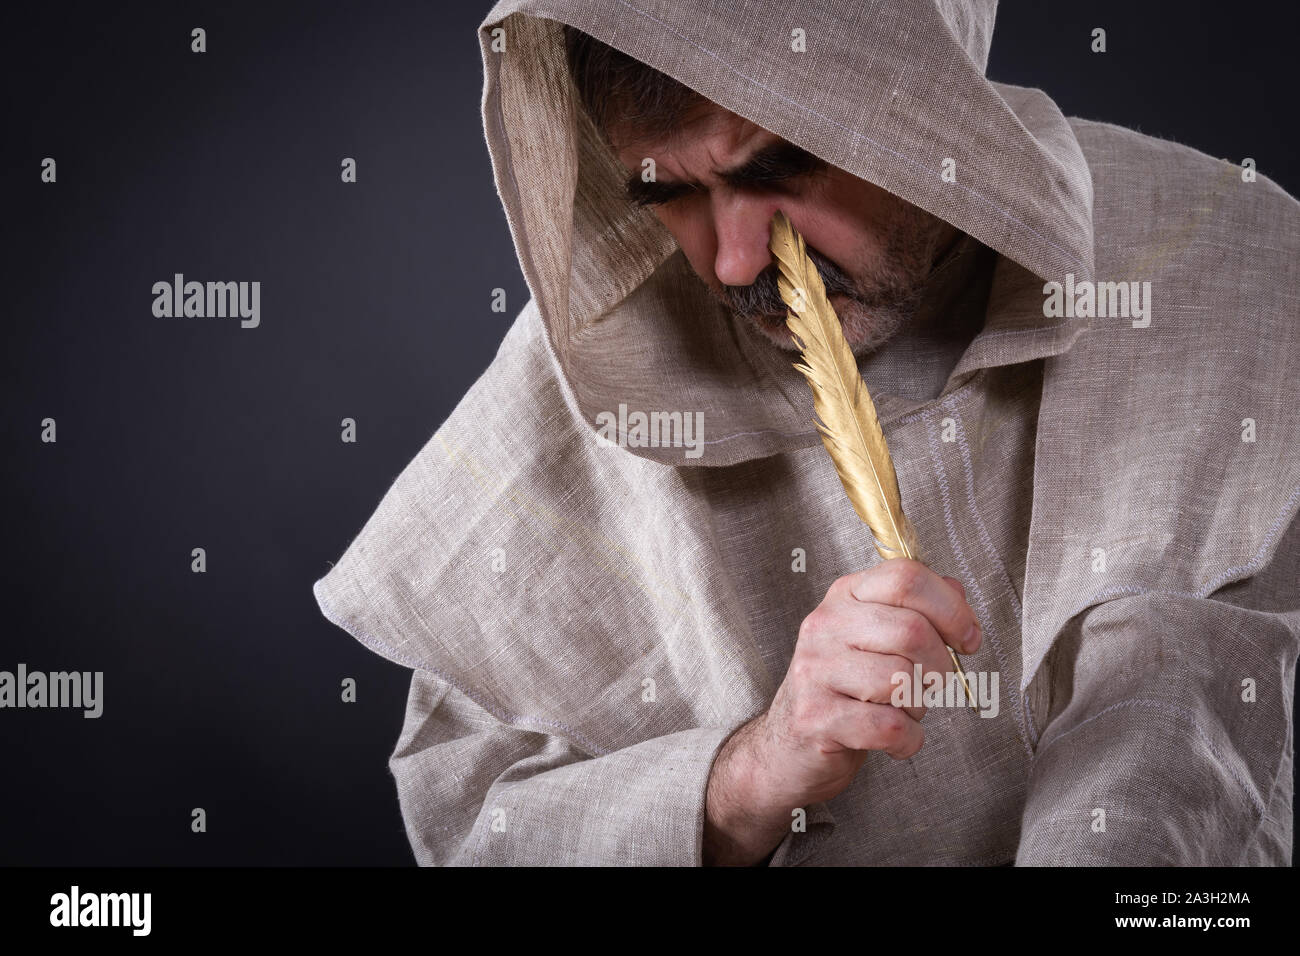 The monk alchemist was very thoughtful about writing a scientific manuscript on alchemy Stock Photo